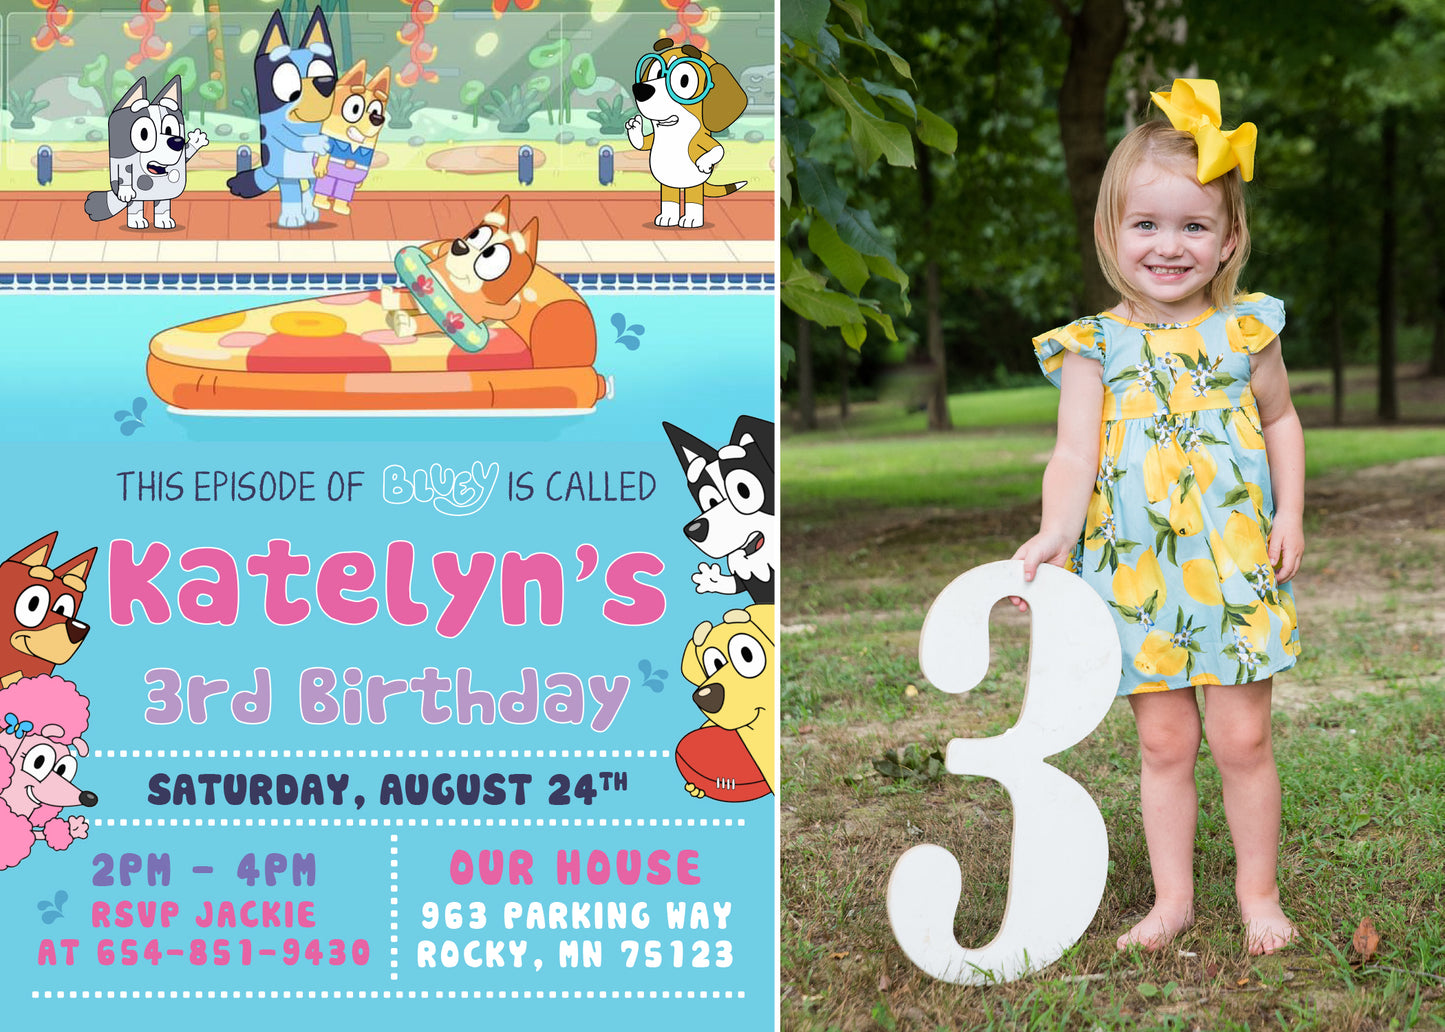 BLUEY Pool Party Birthday Invitation with or without Photo - Printed or Digital File!